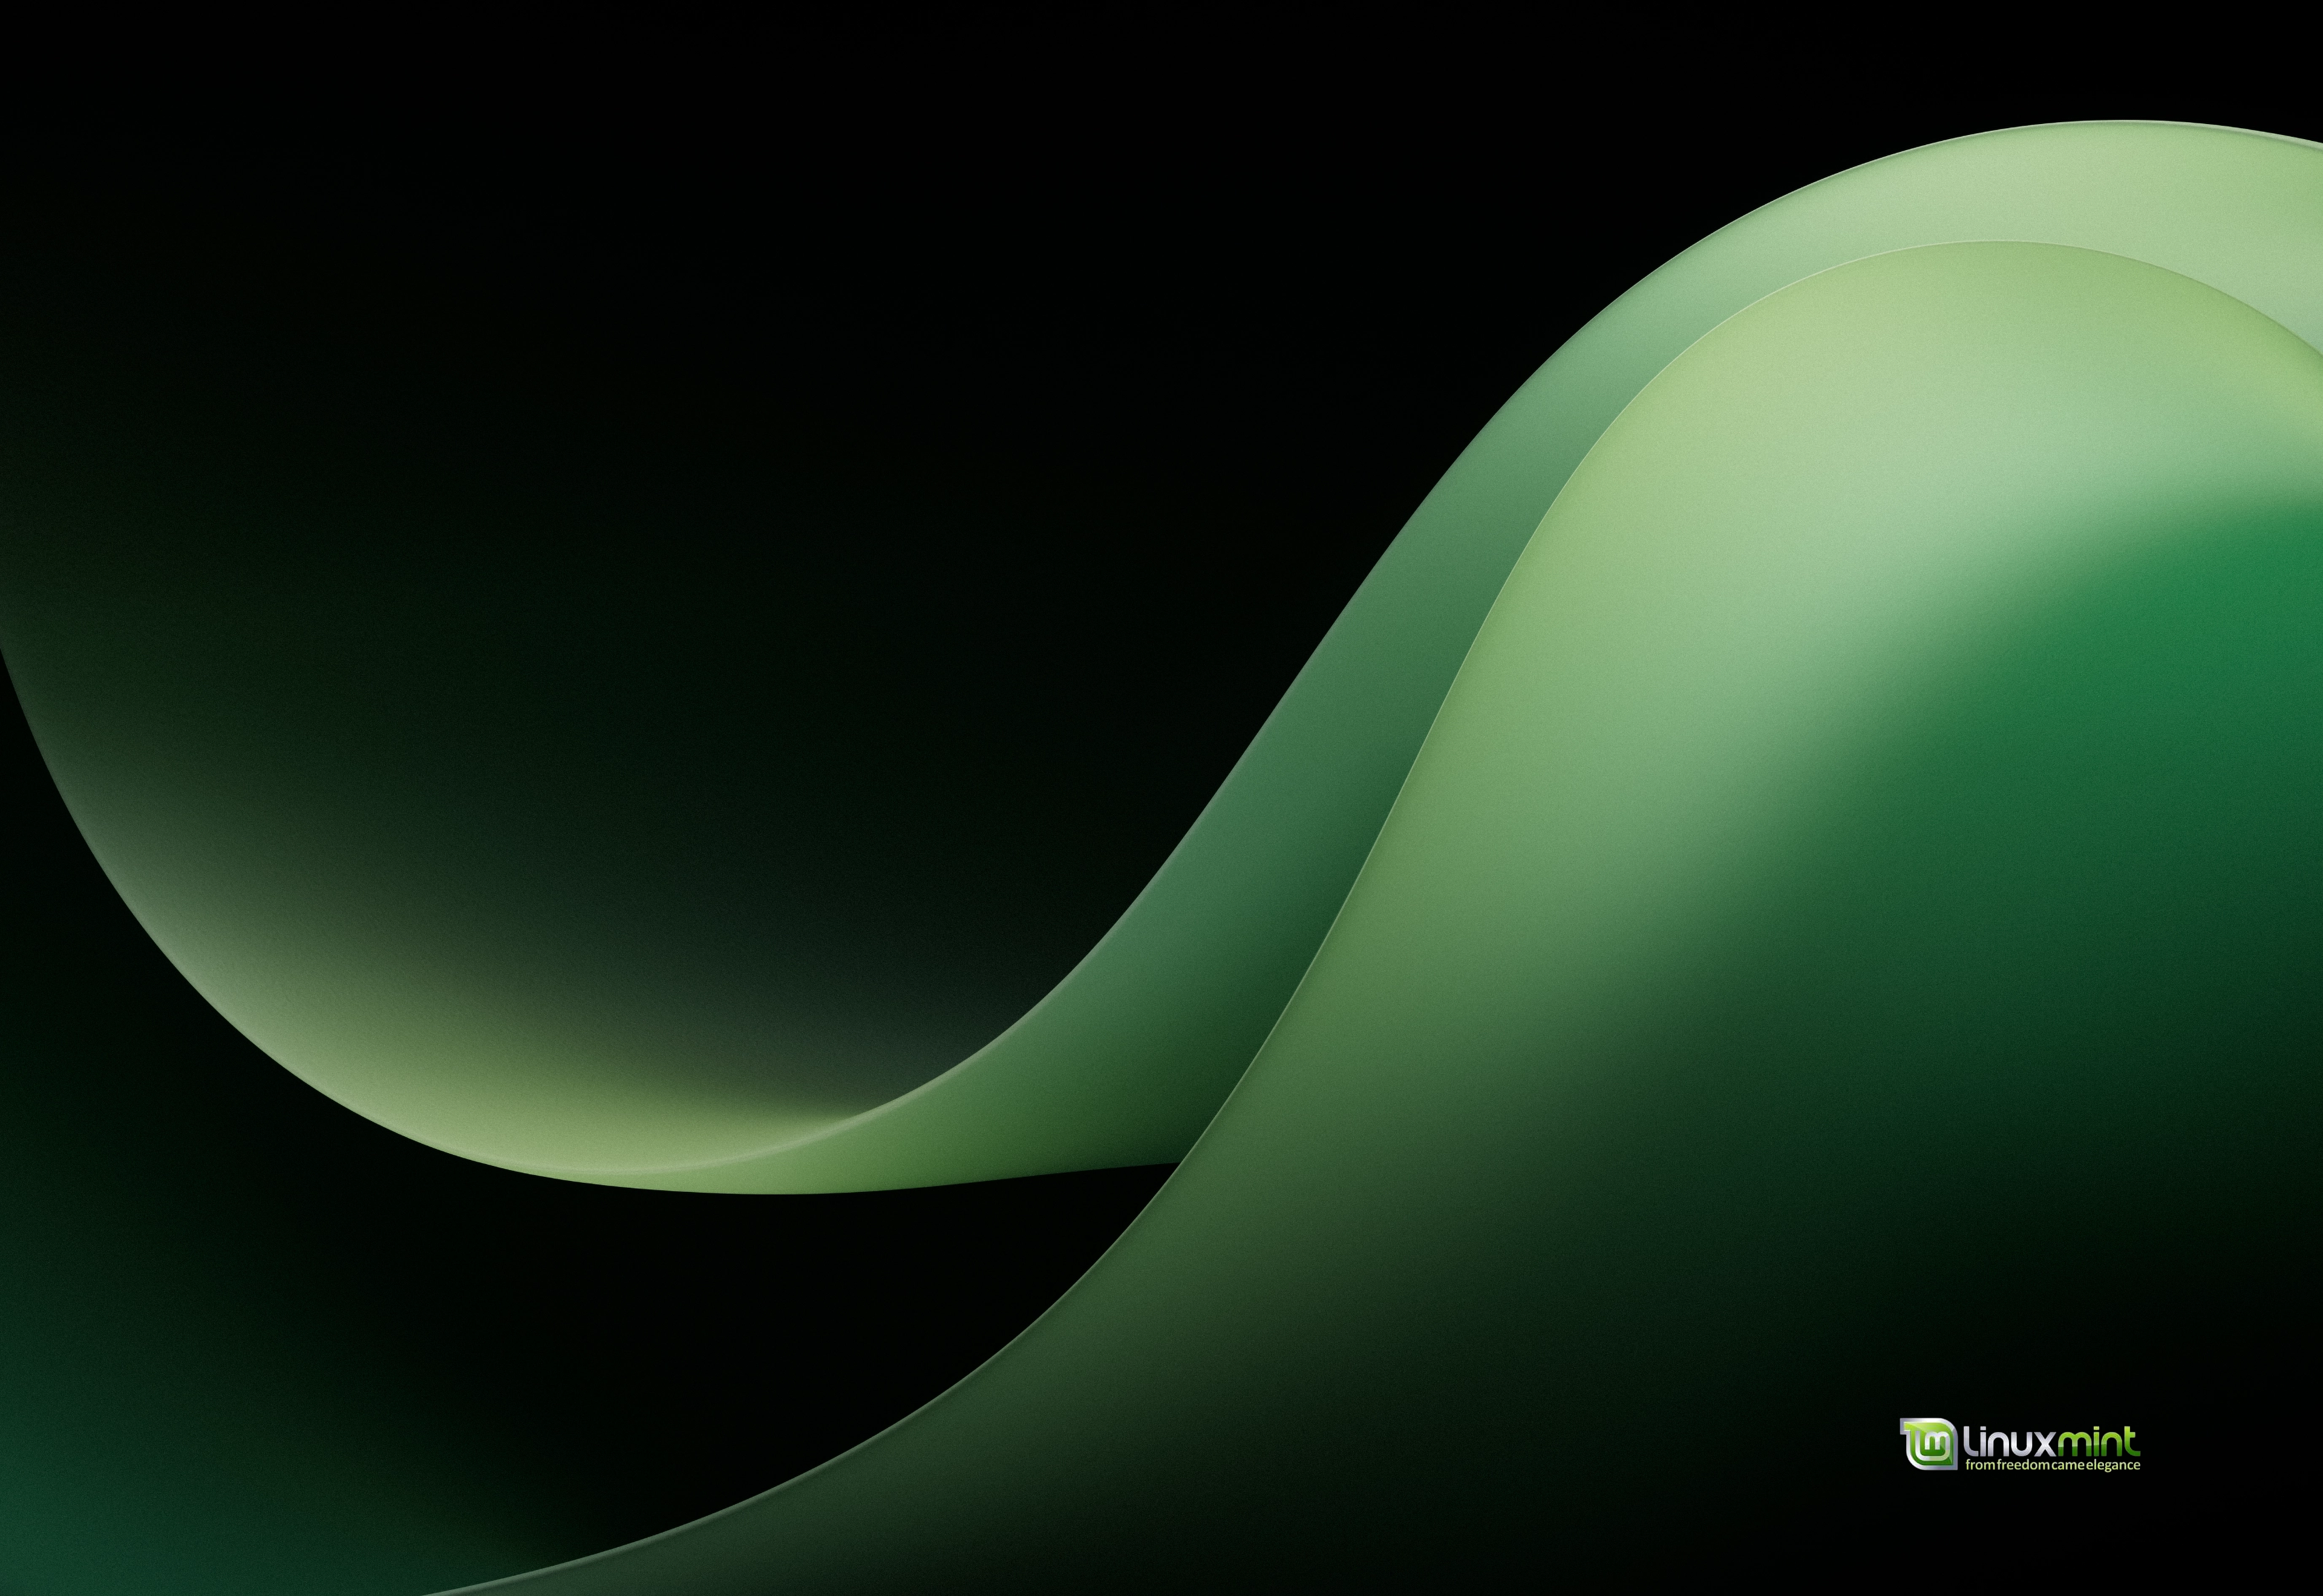 Linux Mint Linux Abstract Minimalism Simple Background 3840x2638